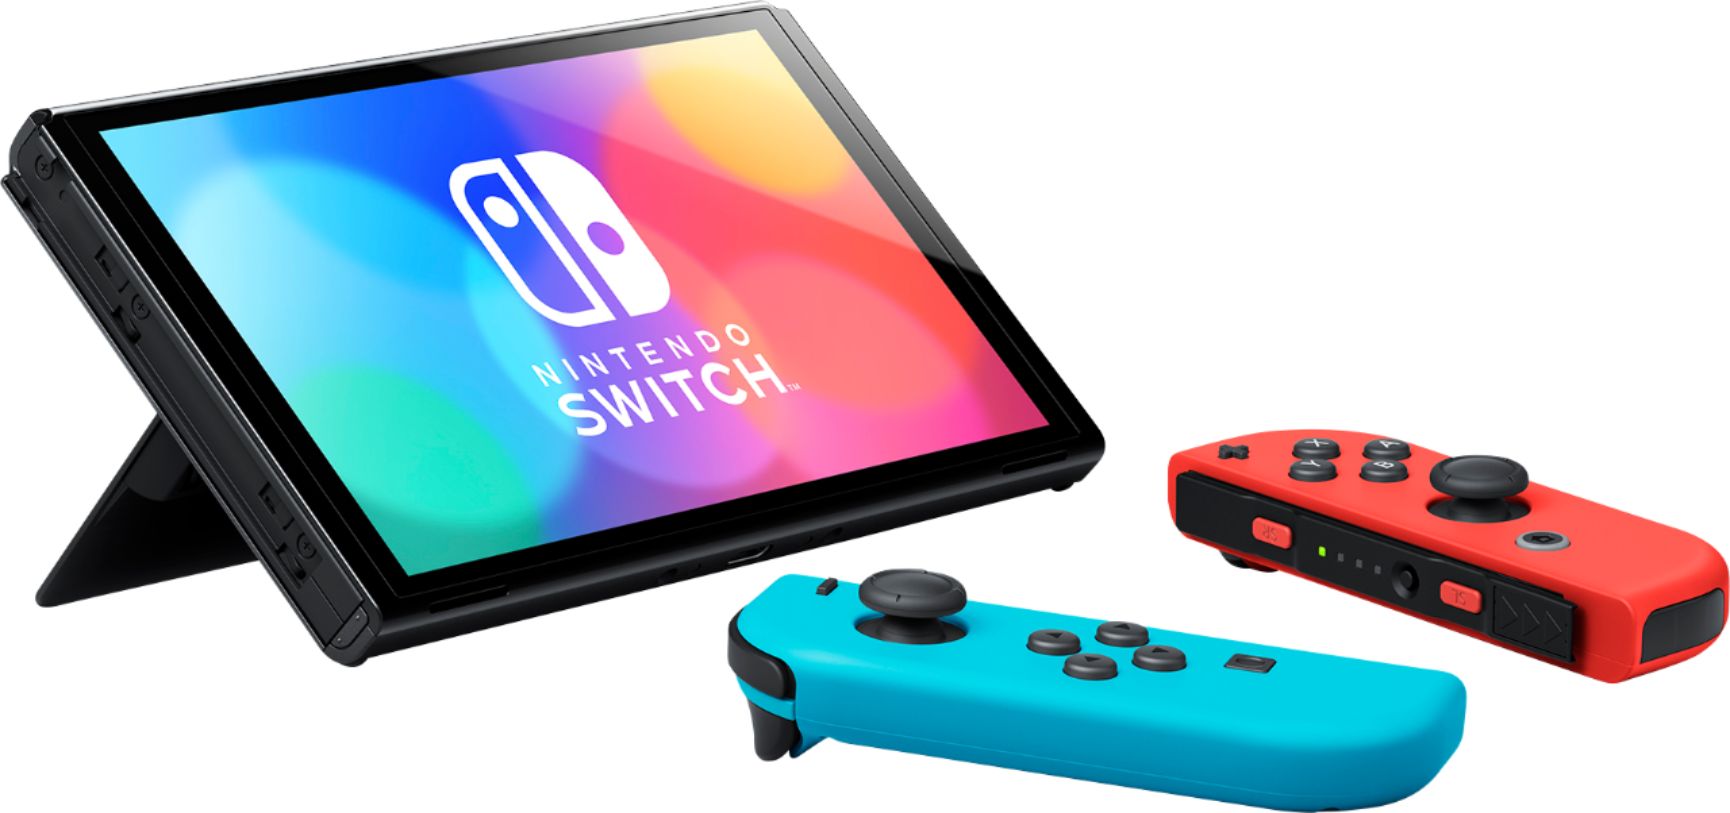 2021 New Nintendo Switch OLED Model Neon Red & Blue Joy Con 64GB Console HD Screen & LAN-Port Dock with Pokemon Shield And Mytrix Joystick Caps & Screen Protector